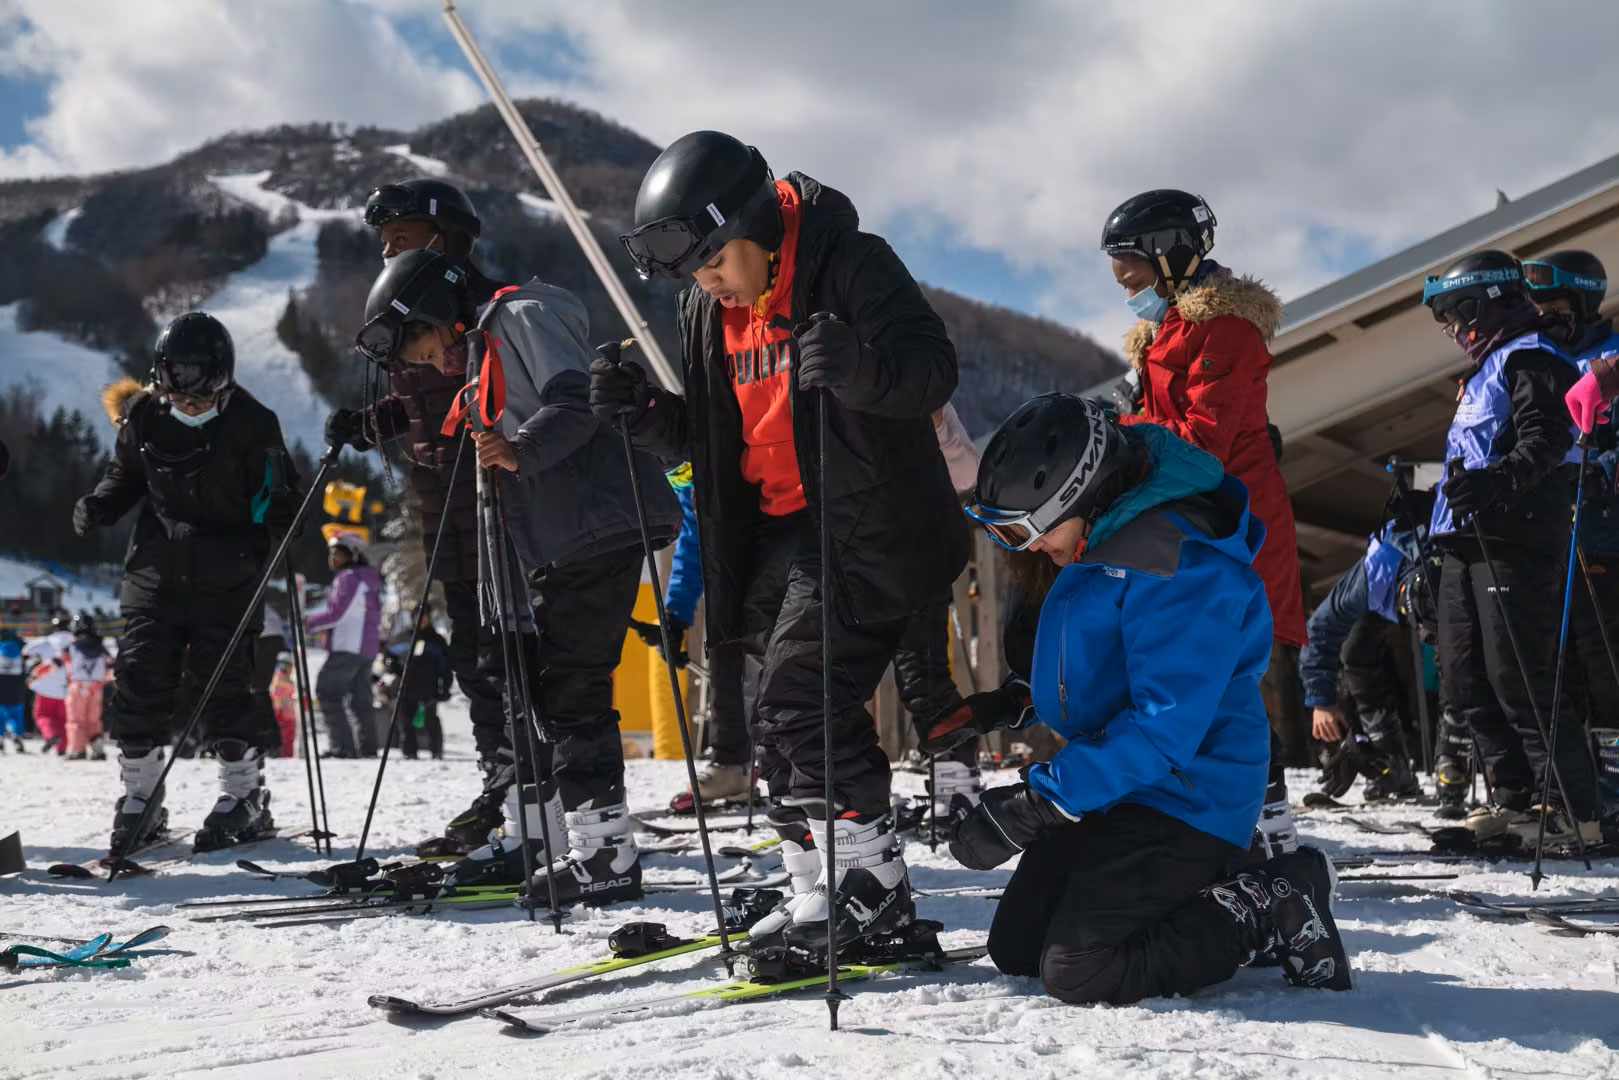 Ski instructor helping young skier with his equipment at ski resort